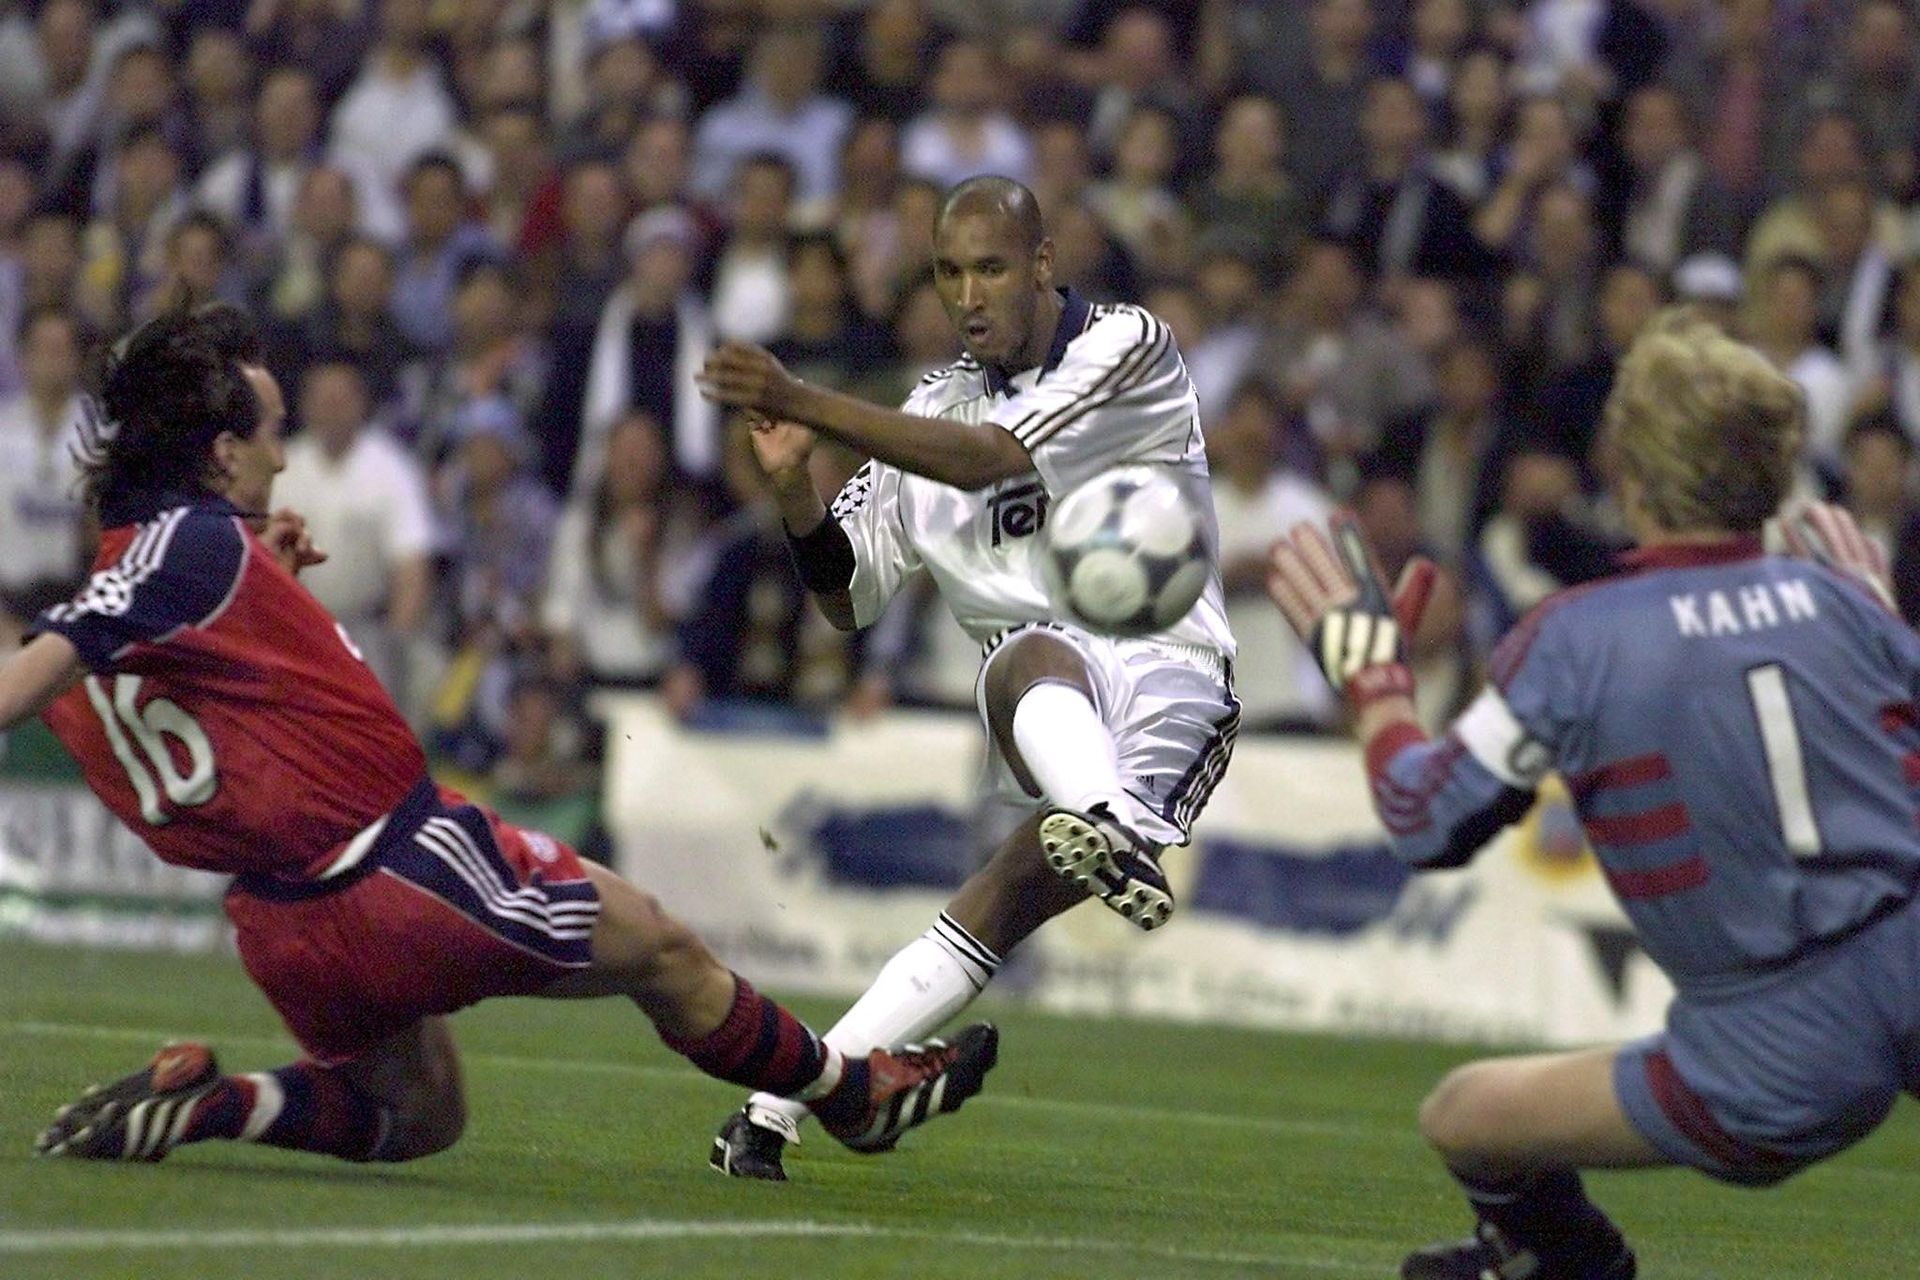 <p>                     After an impressive season at Arsenal in 1998/99, Nicolas Anelka moved to Real Madrid for £22.3 million (€35m) – a huge fee at the time.                   </p>                                      <p>                     Anelka did not score in La Liga until February and was later suspended by the club after refusing to train, but the French forward is remembered for scoring in both legs in the Champions League semi-final win over Bayern Munich. Overall, he netted just seven times in 31 appearances and left for Paris Saint-Germain a year later for a slightly lower fee (€34.5m).                   </p>